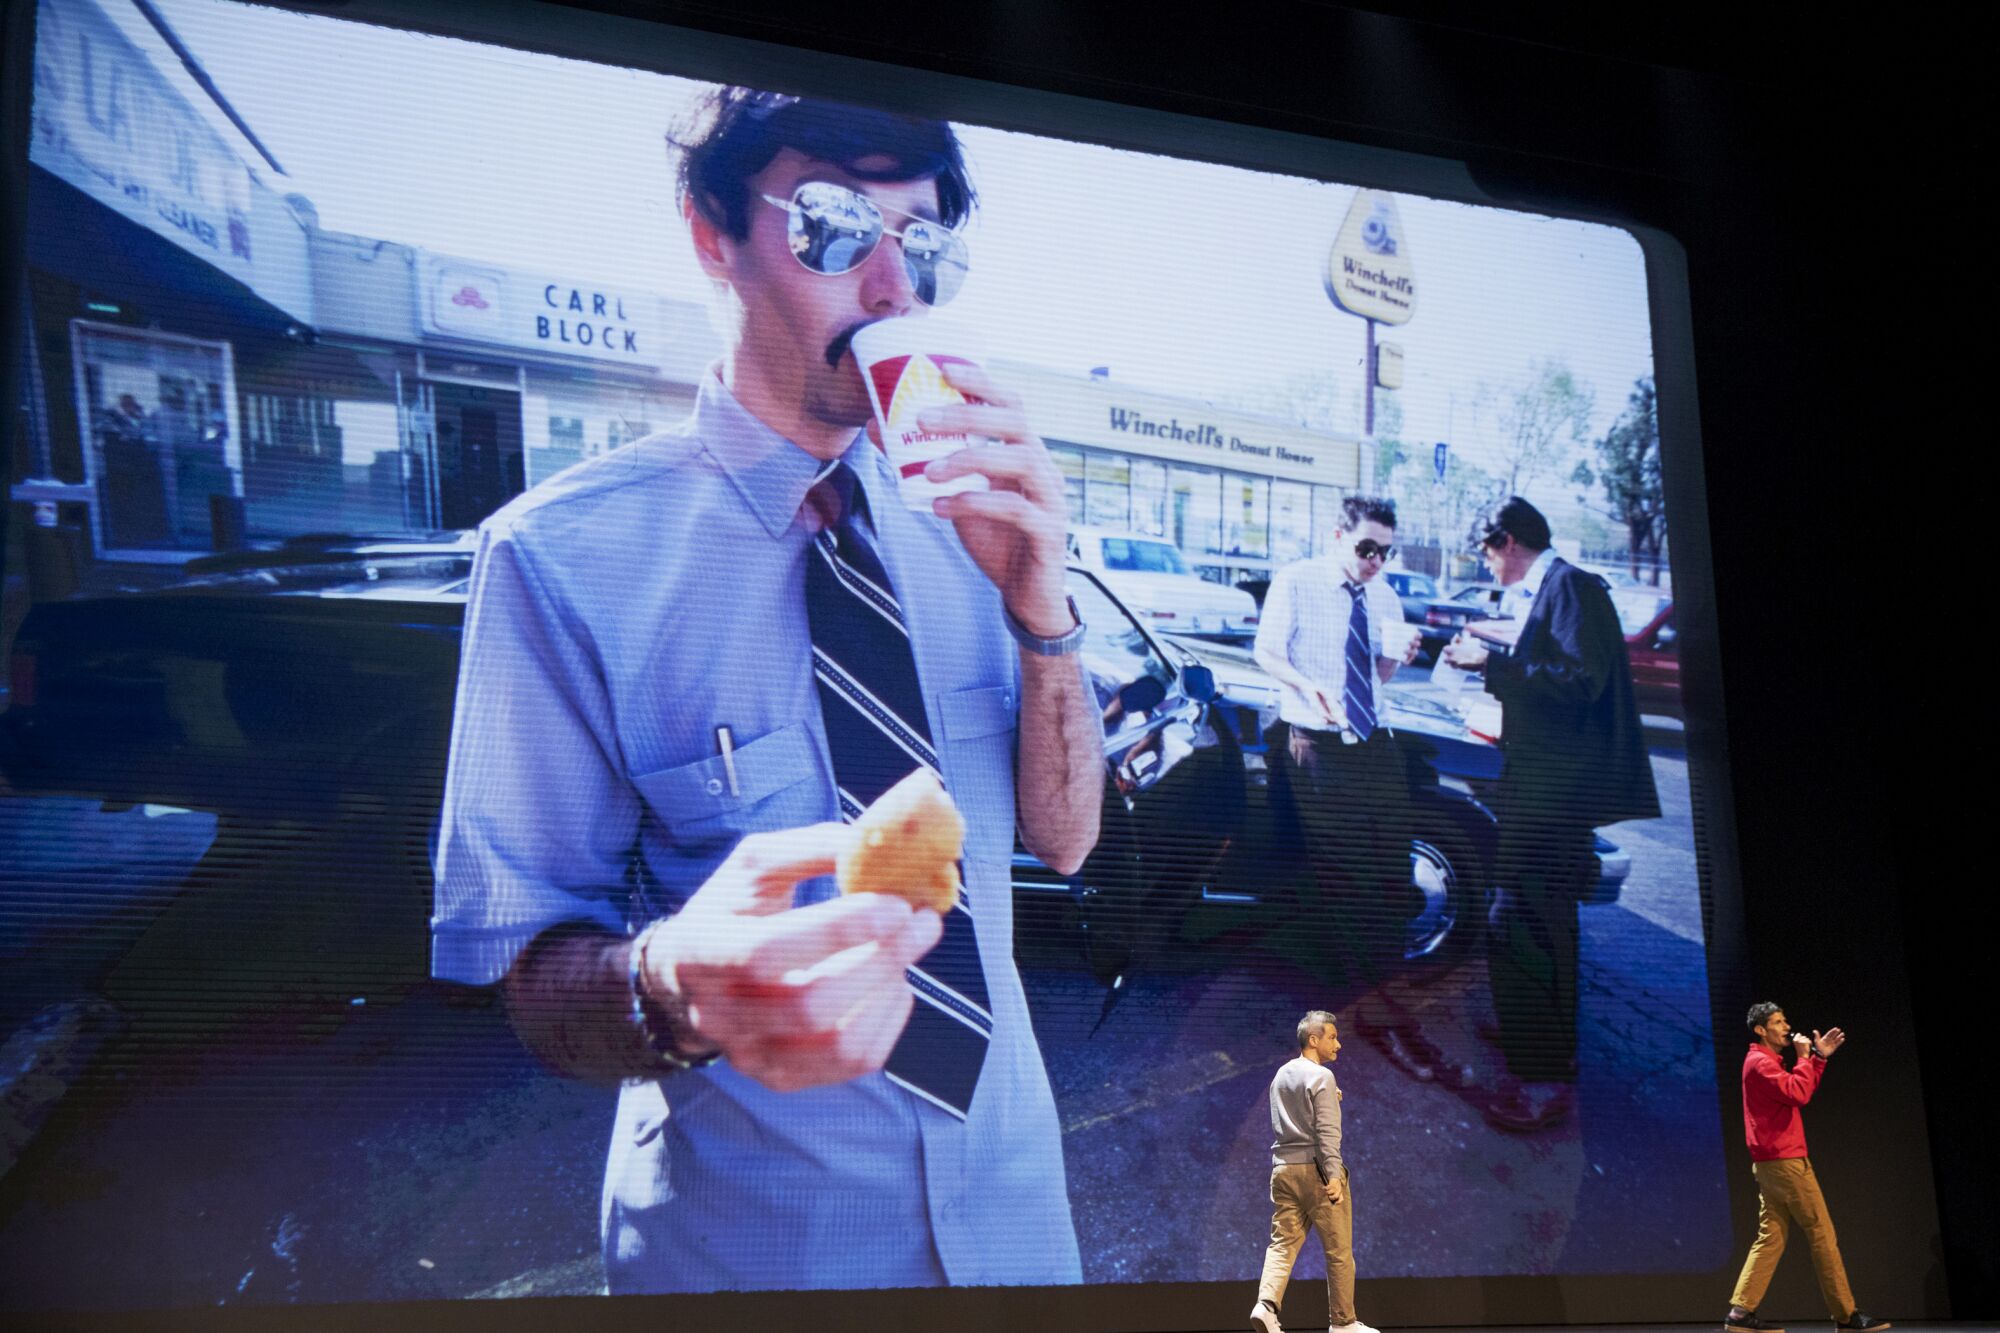 Filming of Spike Jonze’s "Beastie Boys Story" in April 2019 at Kings Theatre in Brooklyn, N.Y. The late Adam Yauch is seen on the big screen; Adam Horovitz and Michael Diamond are on stage.